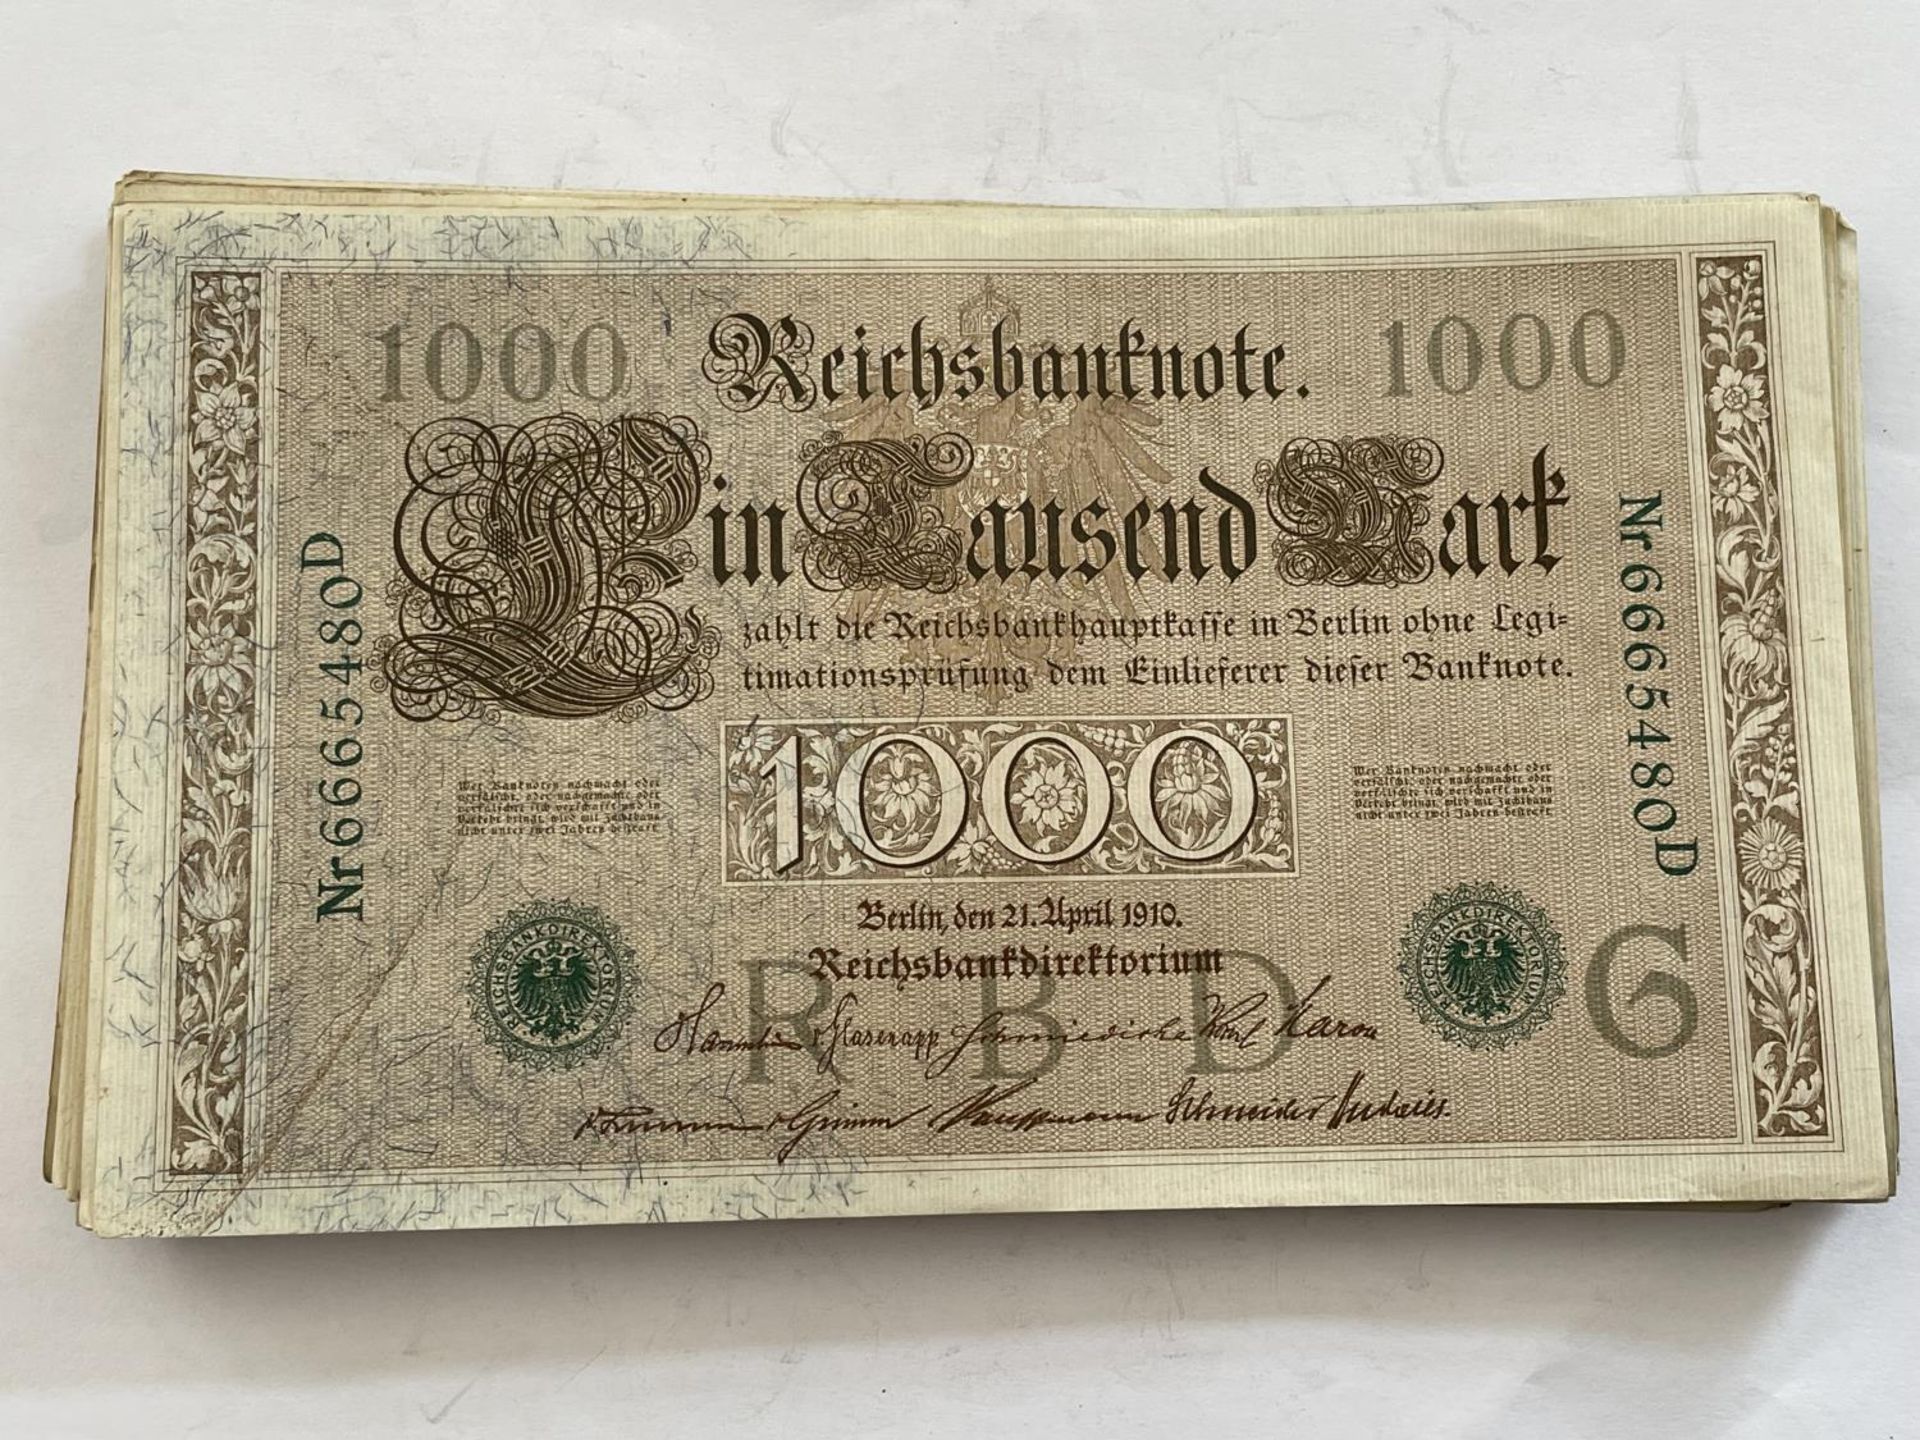 AN ENVELOPE CONTAINING A LARGE QUANTITY OF TAUSEND MARK GERMAN BANK NOTES, DATED BERLIN 21 APRIL